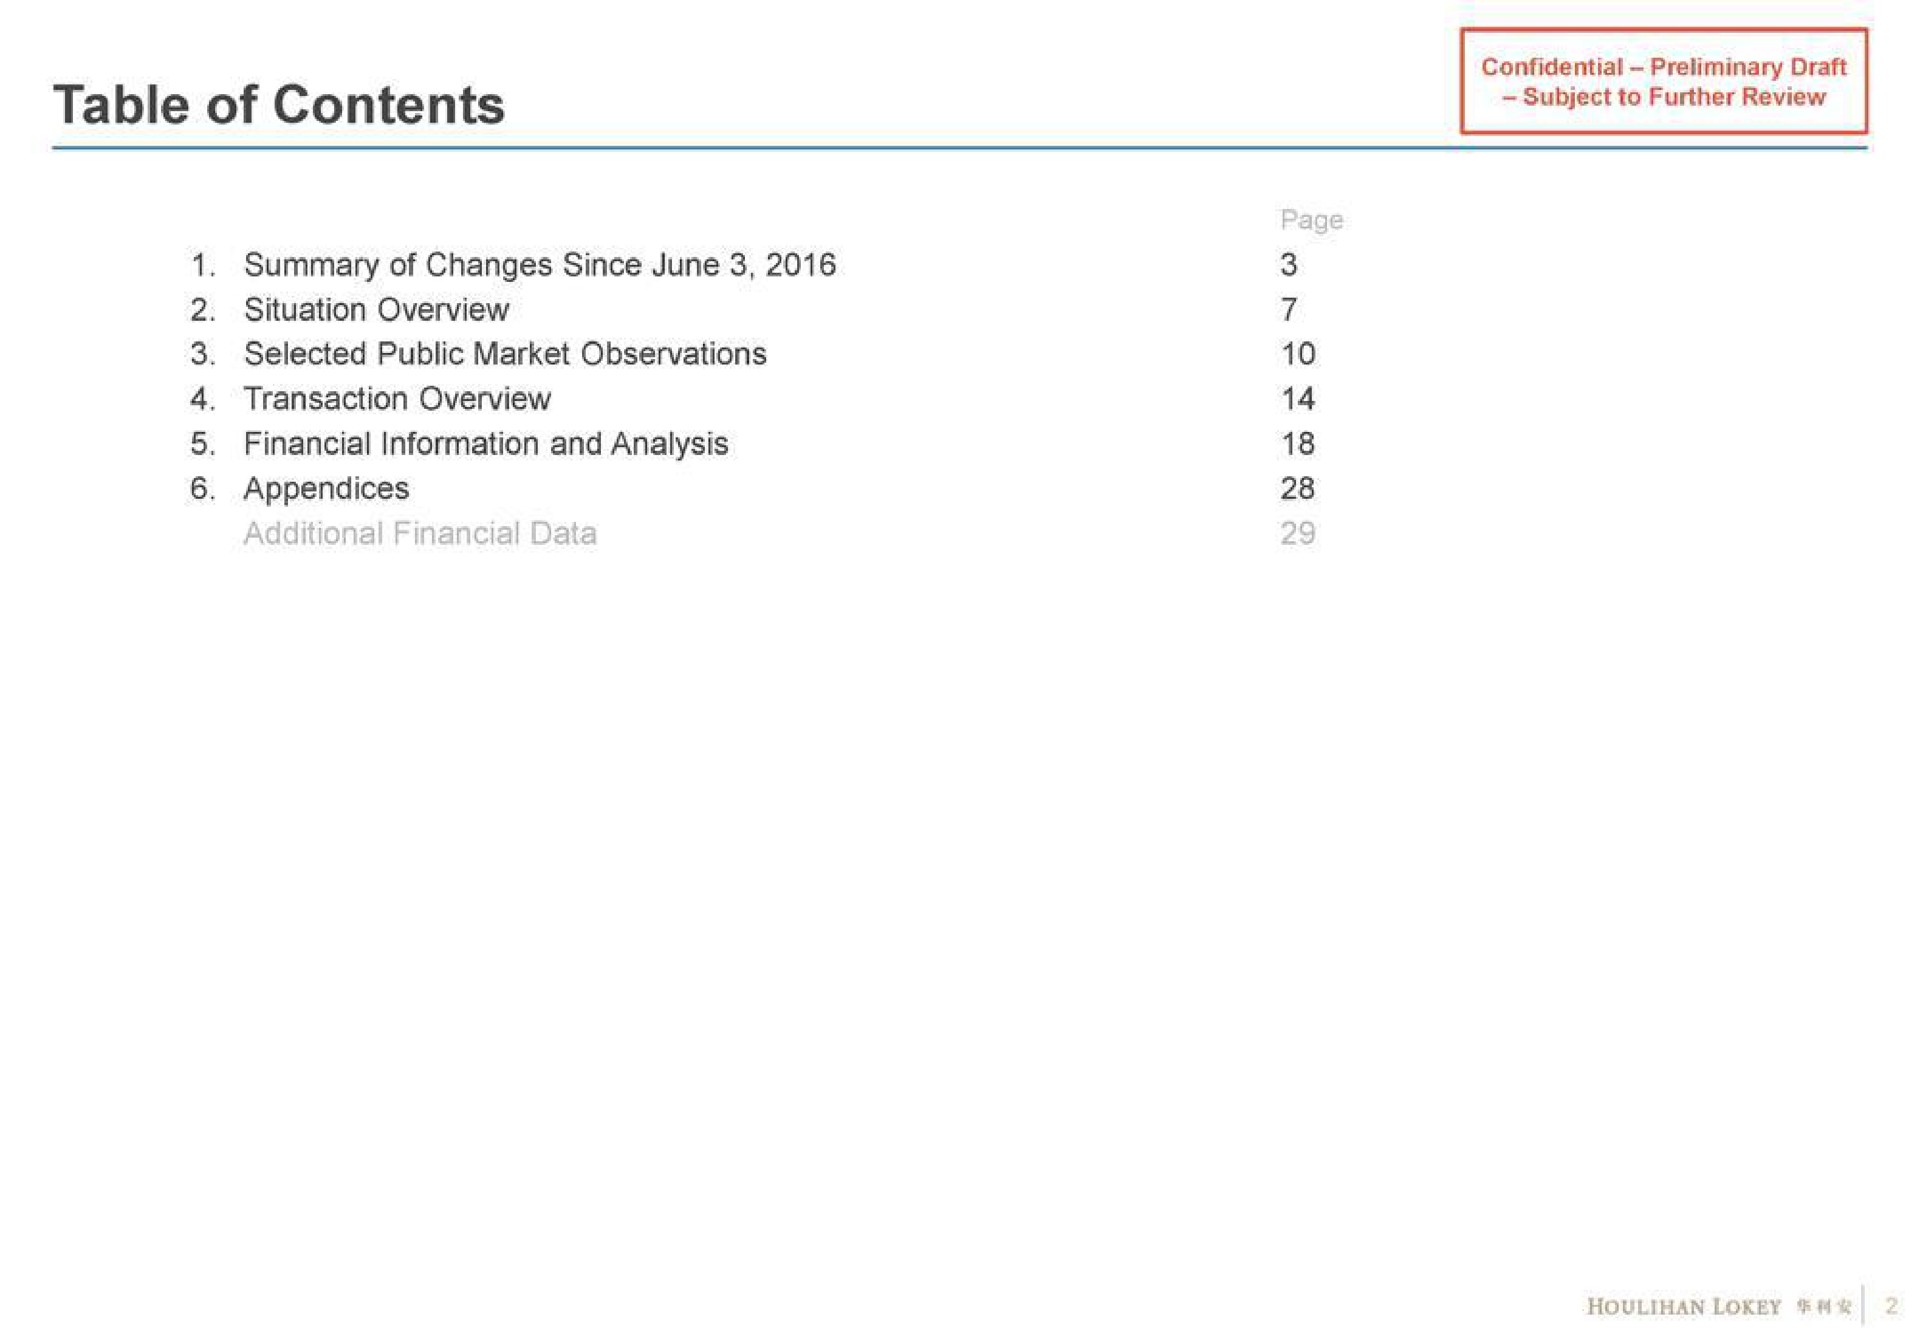 table of contents summary of changes since june situation overview transaction overview financial information and analysis appendices | Houlihan Lokey